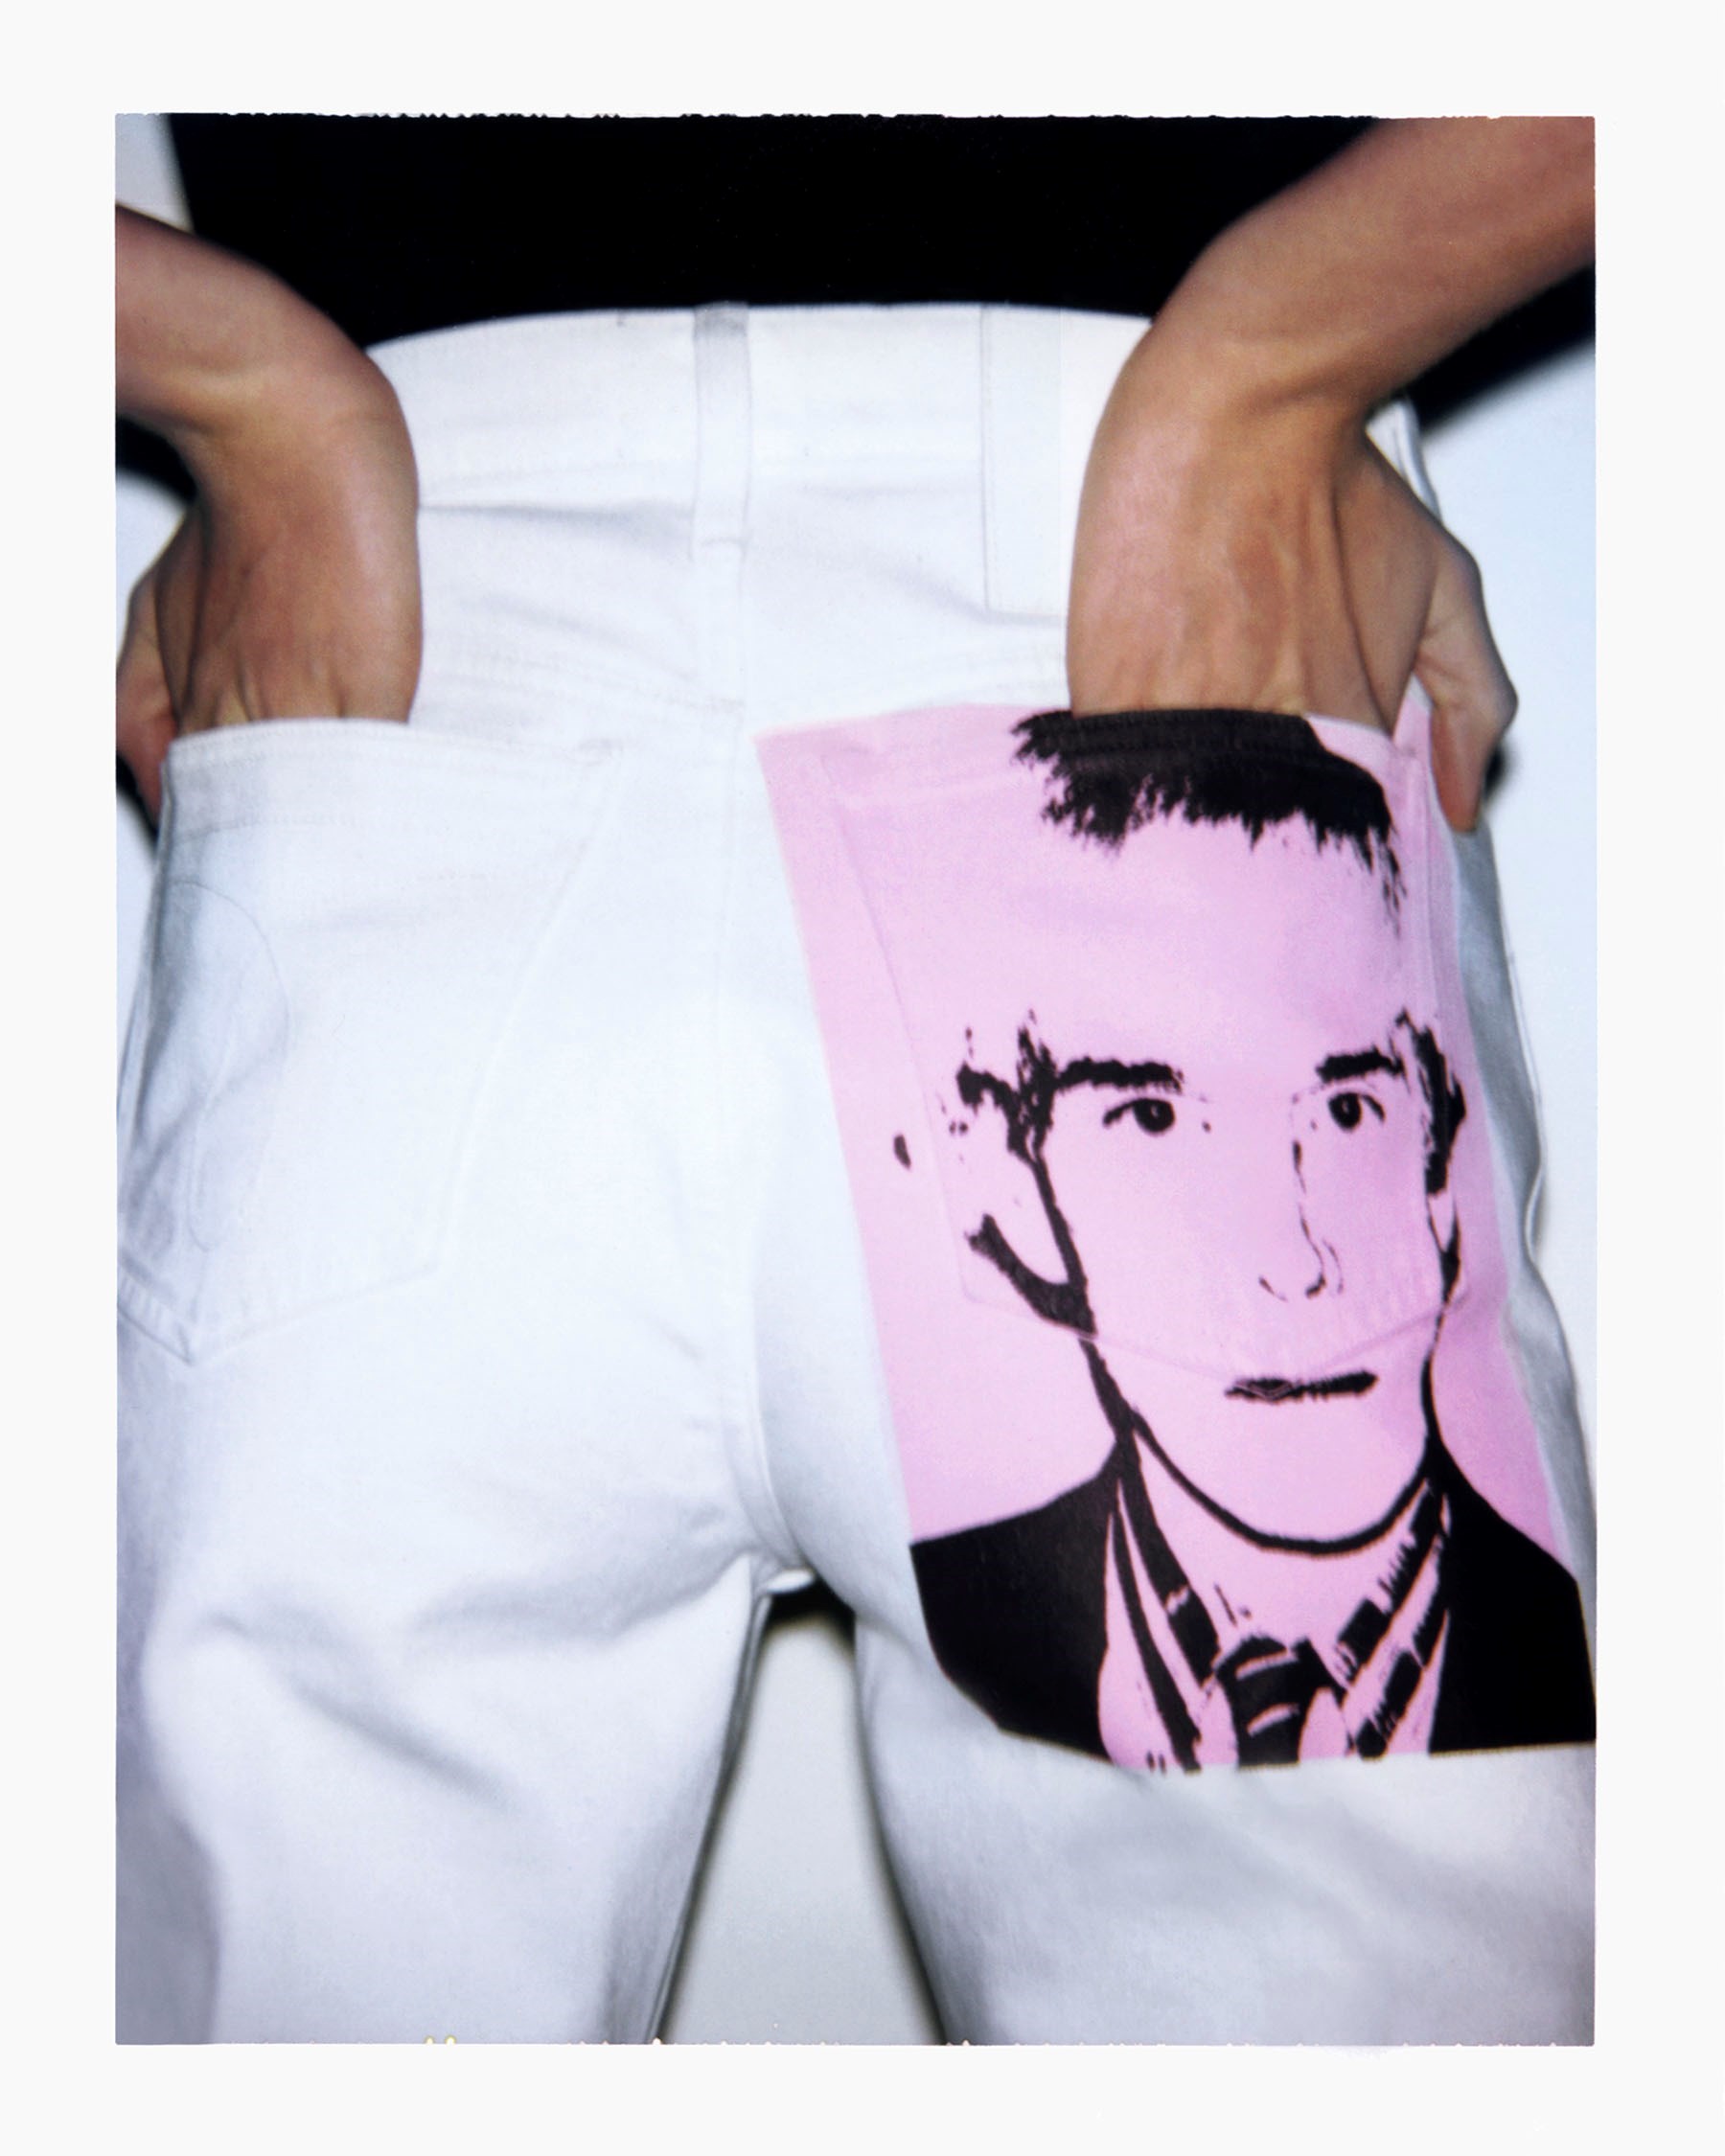 Andy Warhol is back in Calvin Klein's latest collection